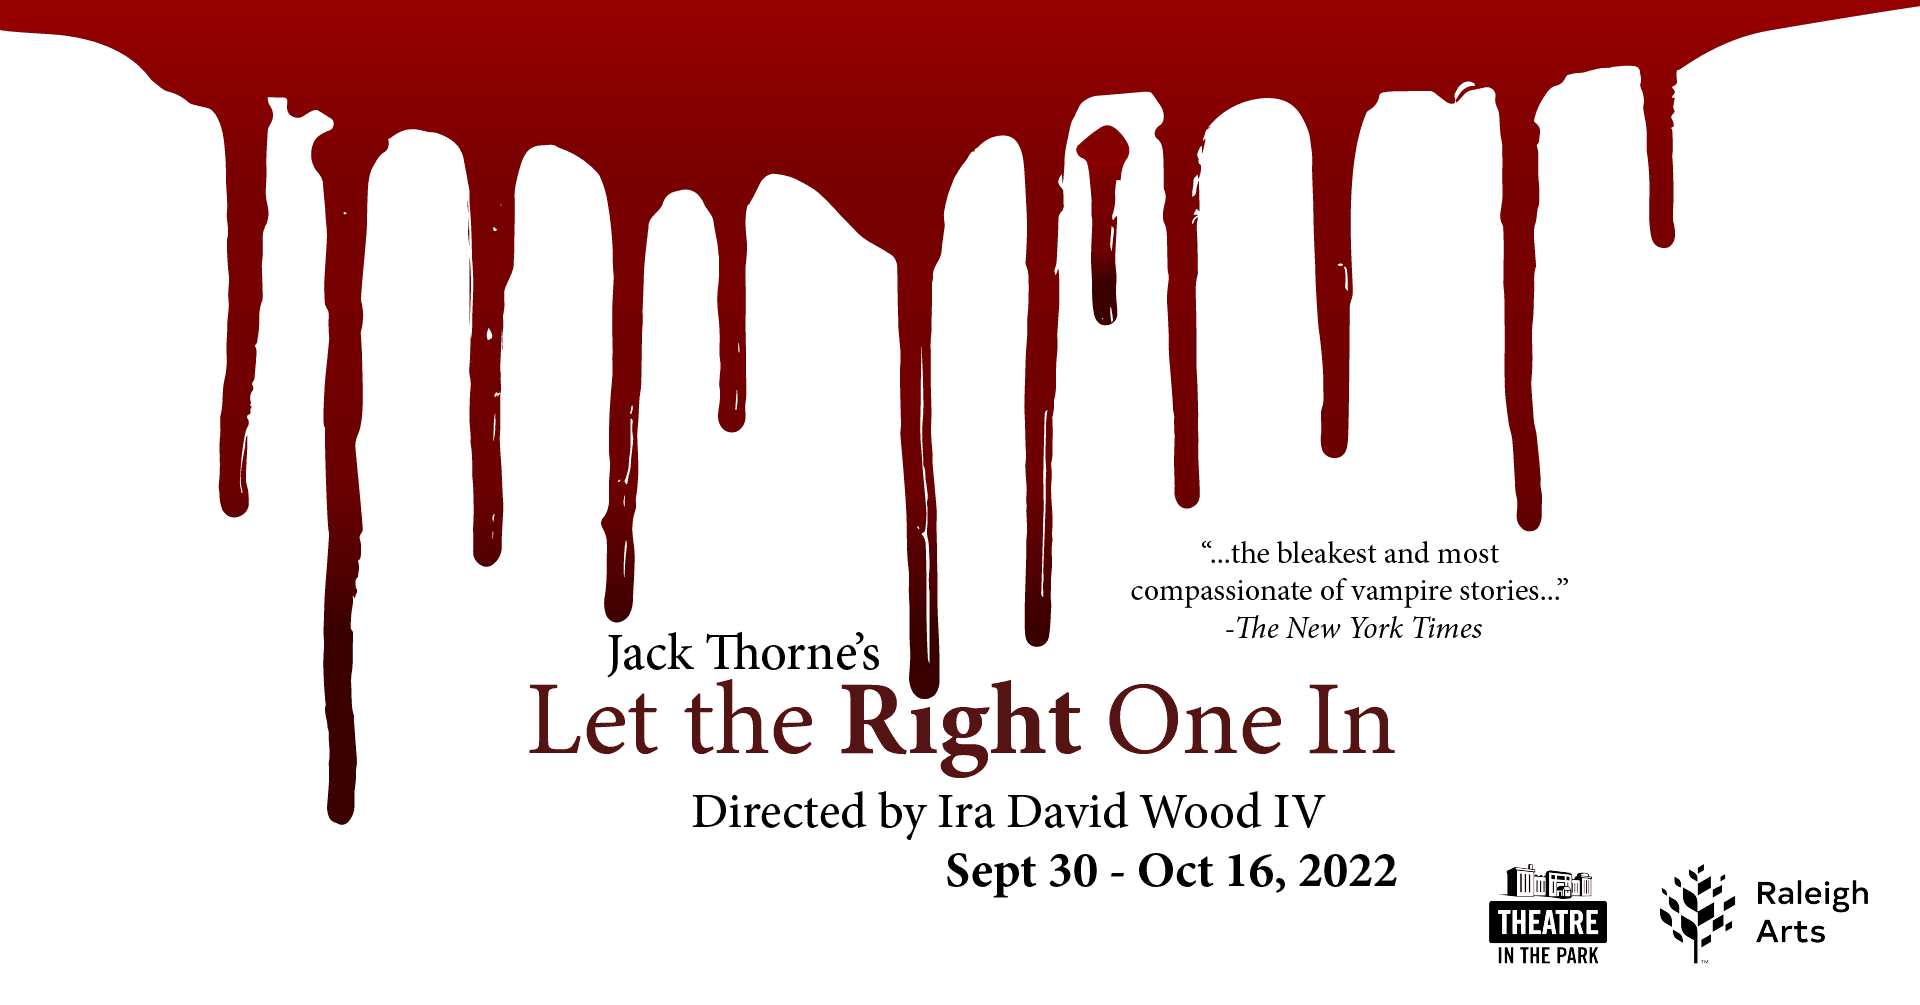 Jacke Thorne's Let the Right One In